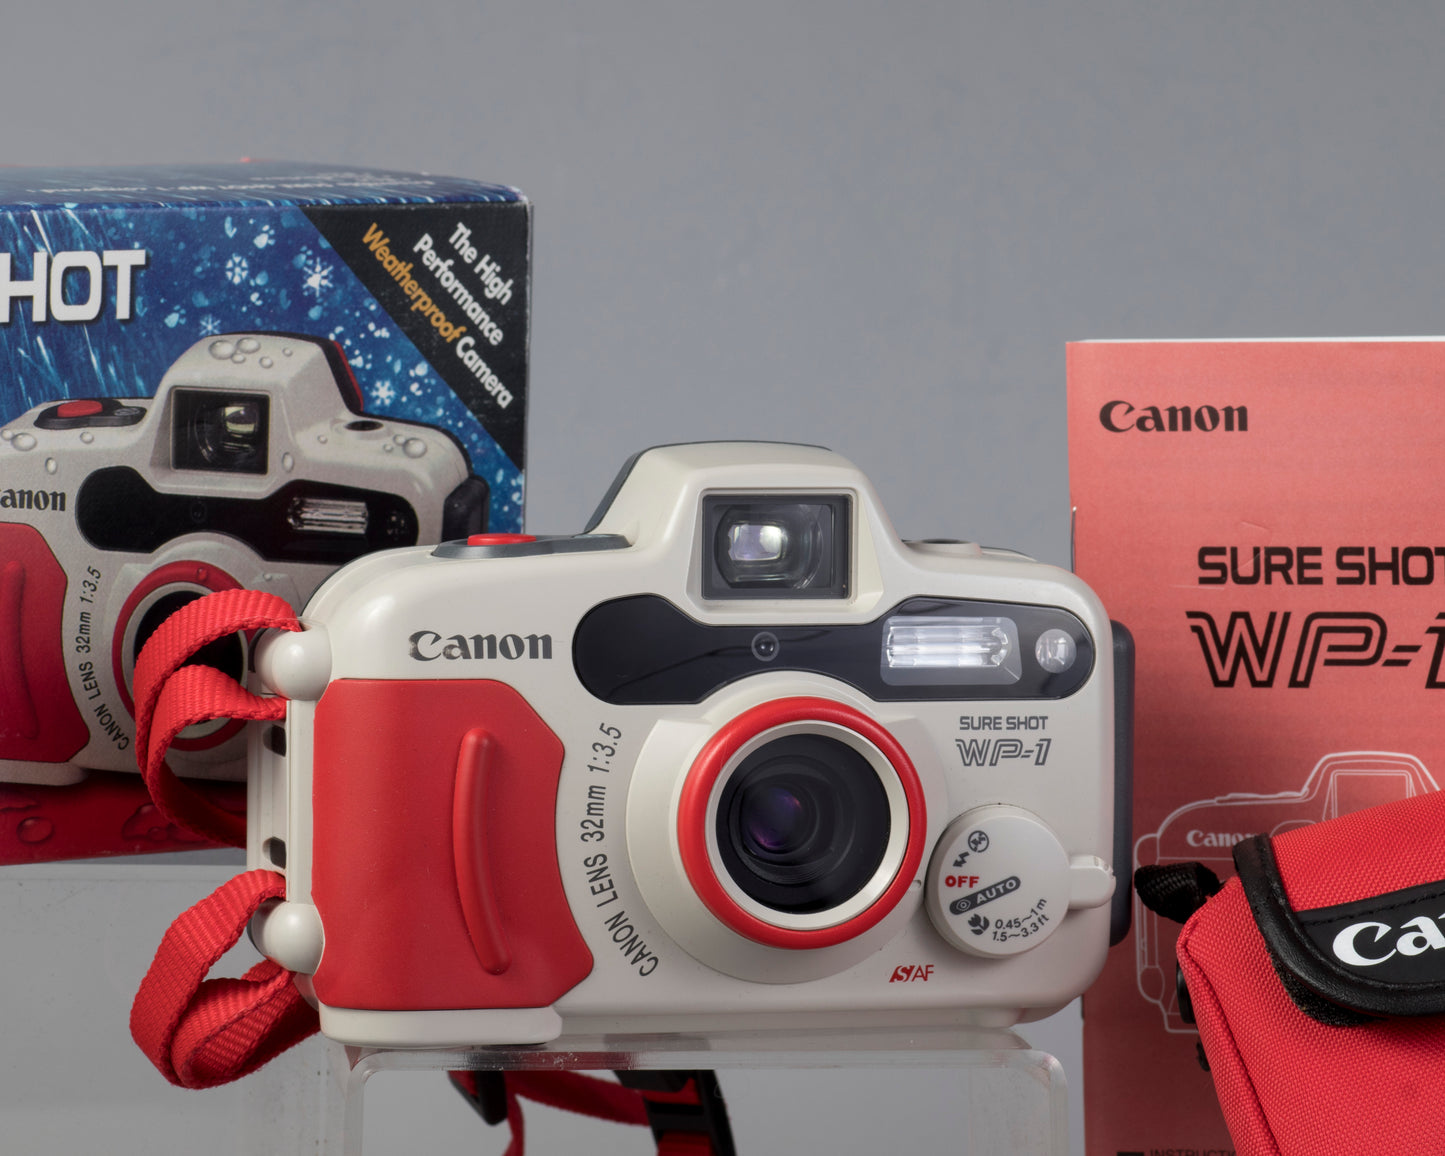 The Canon Sure Shot WP-1 is a high quality waterproof 35mm film camera from the 1990s